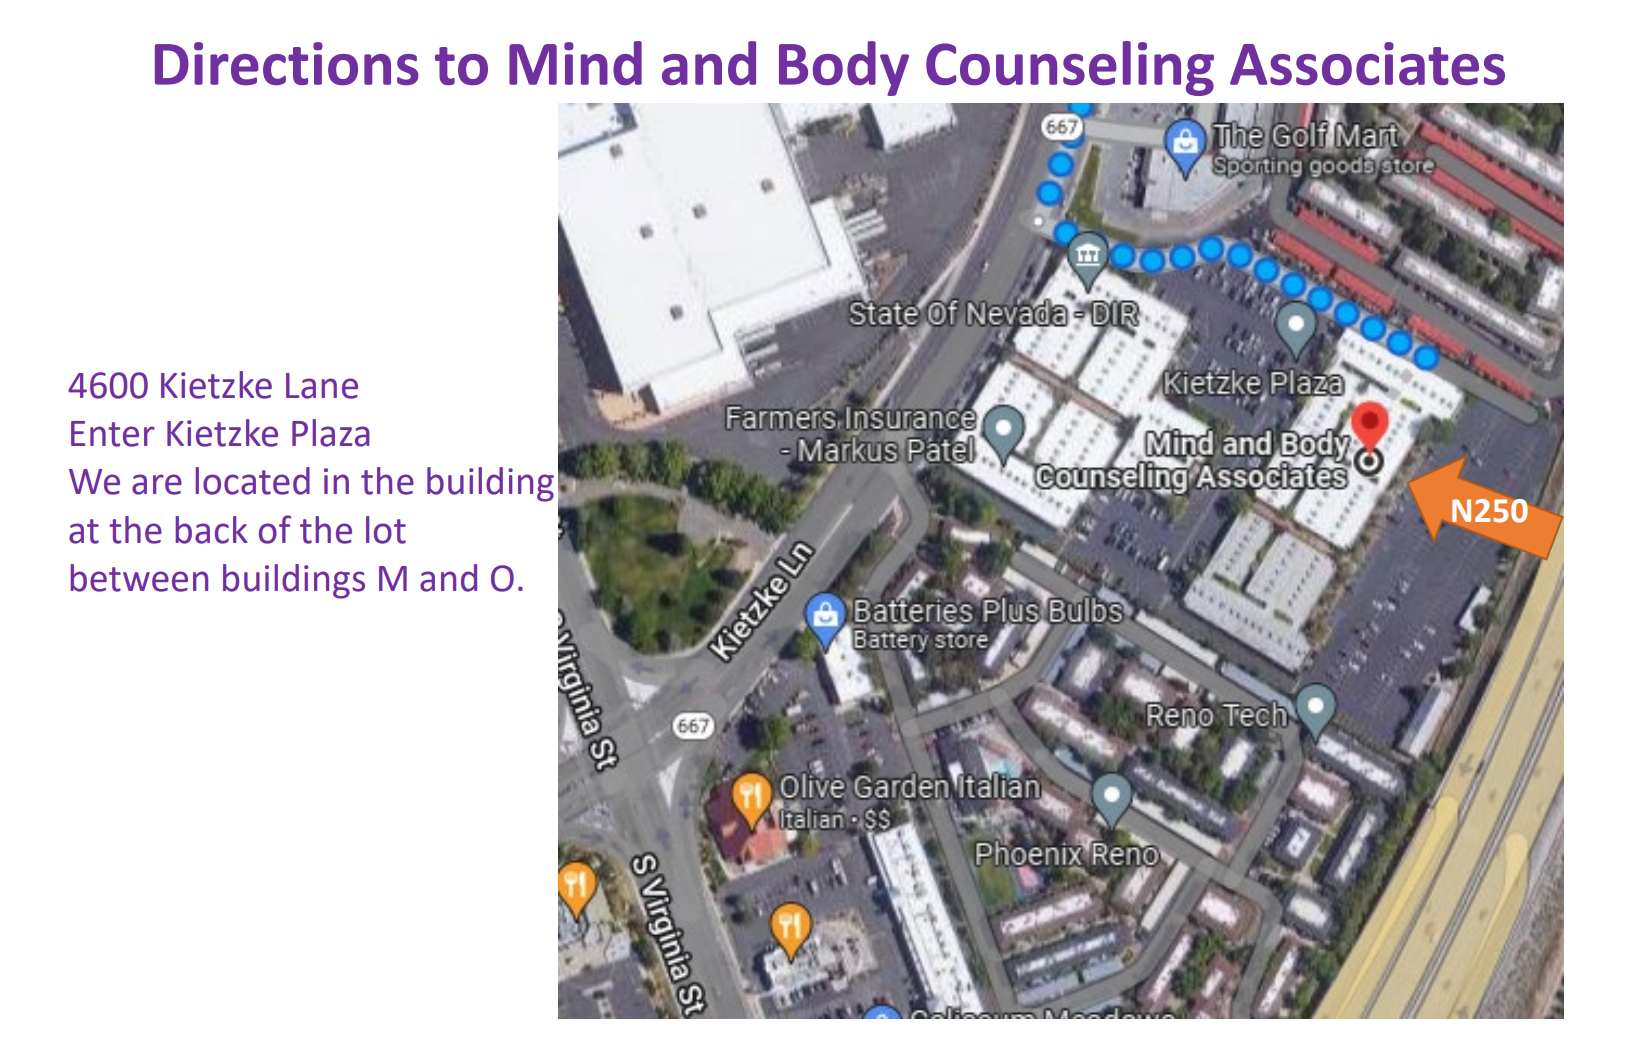 Directions to Mind and Body Counseling Associates